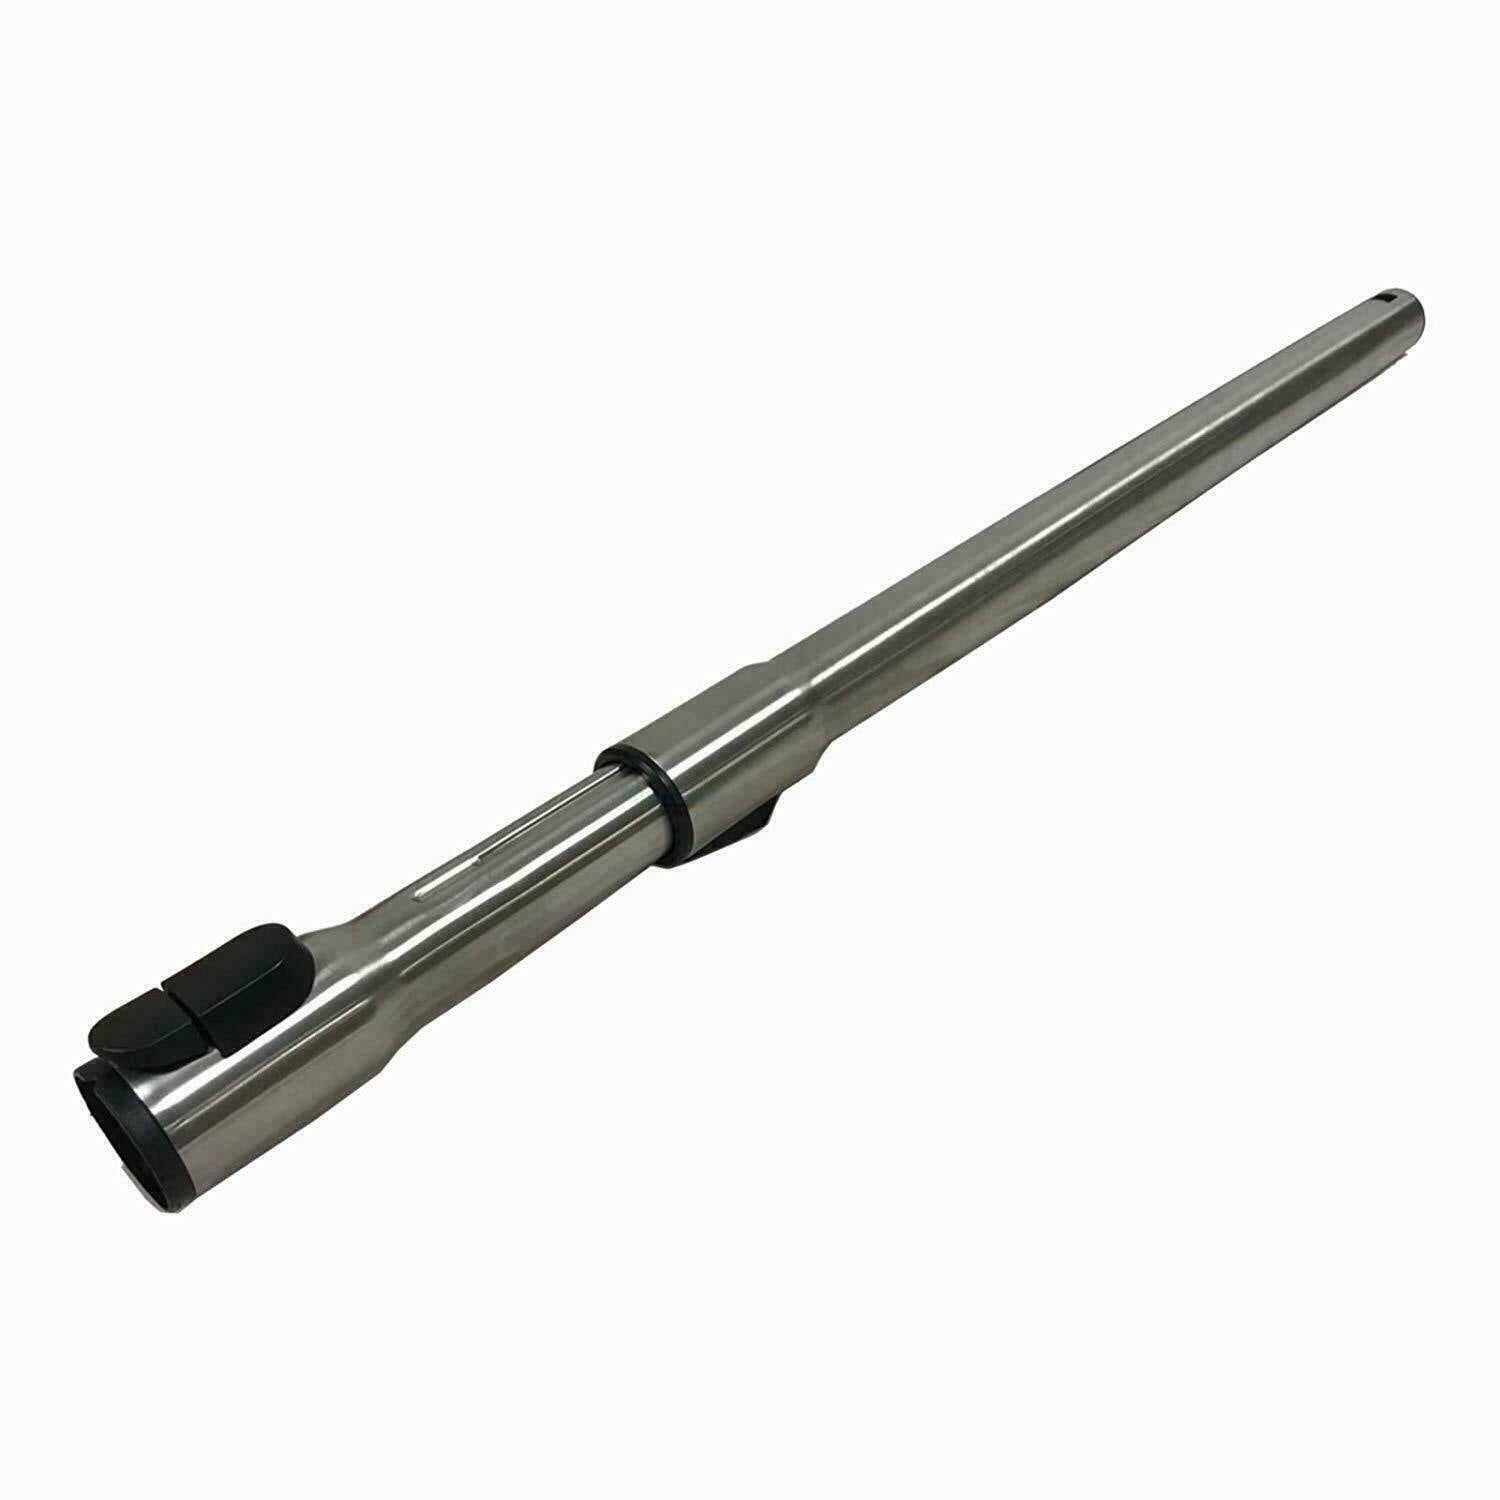 Telescopic Extension Tube Pipe Rod For Miele S634 S636 S638 S644 S624 S626 S624 Sparesbarn